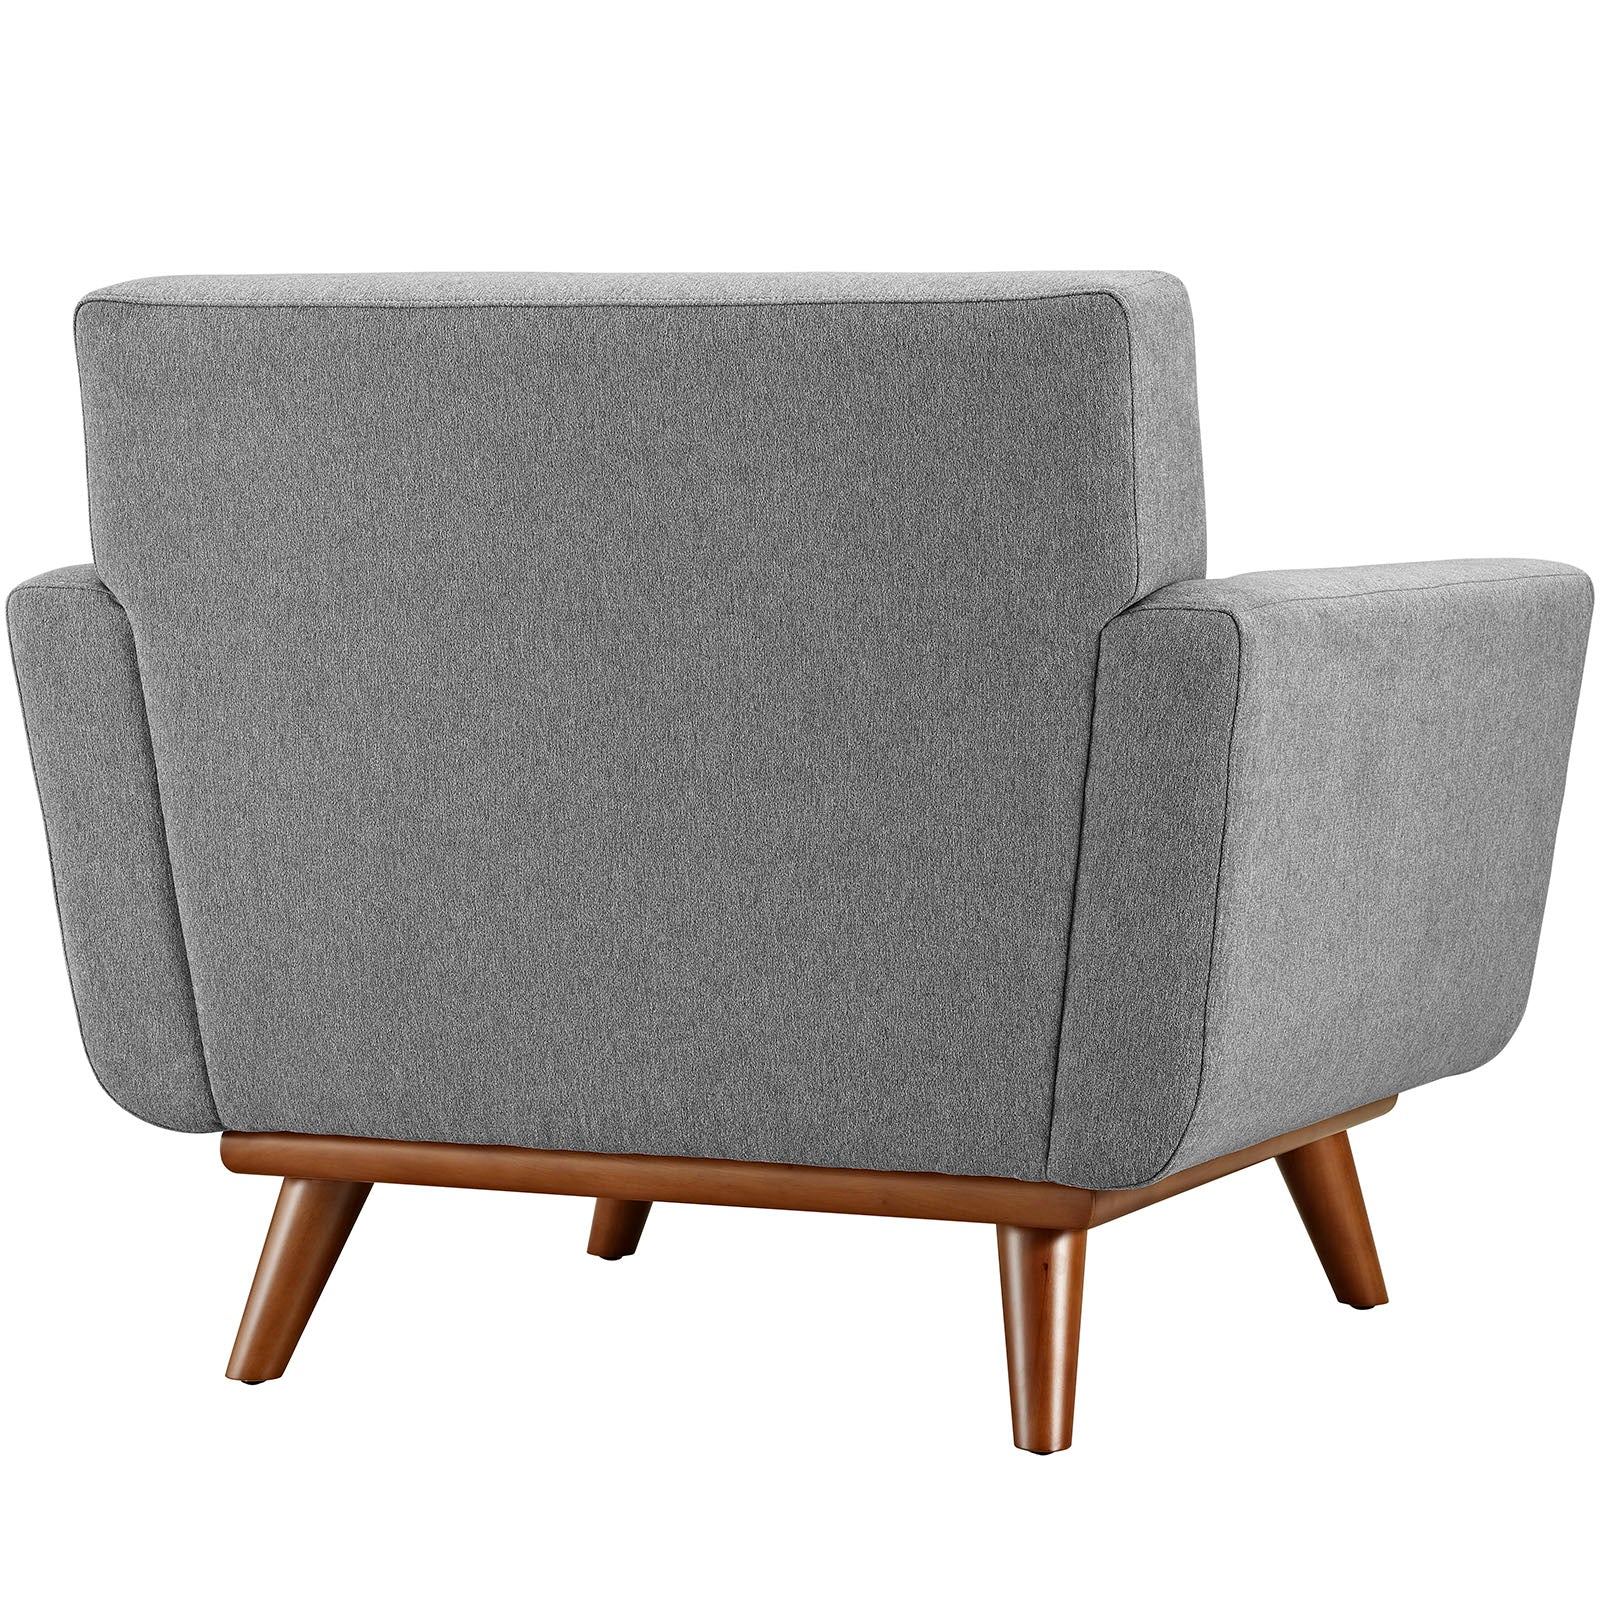 Modway Accent Chairs - Engage Upholstered Fabric Armchair Expectation Gray